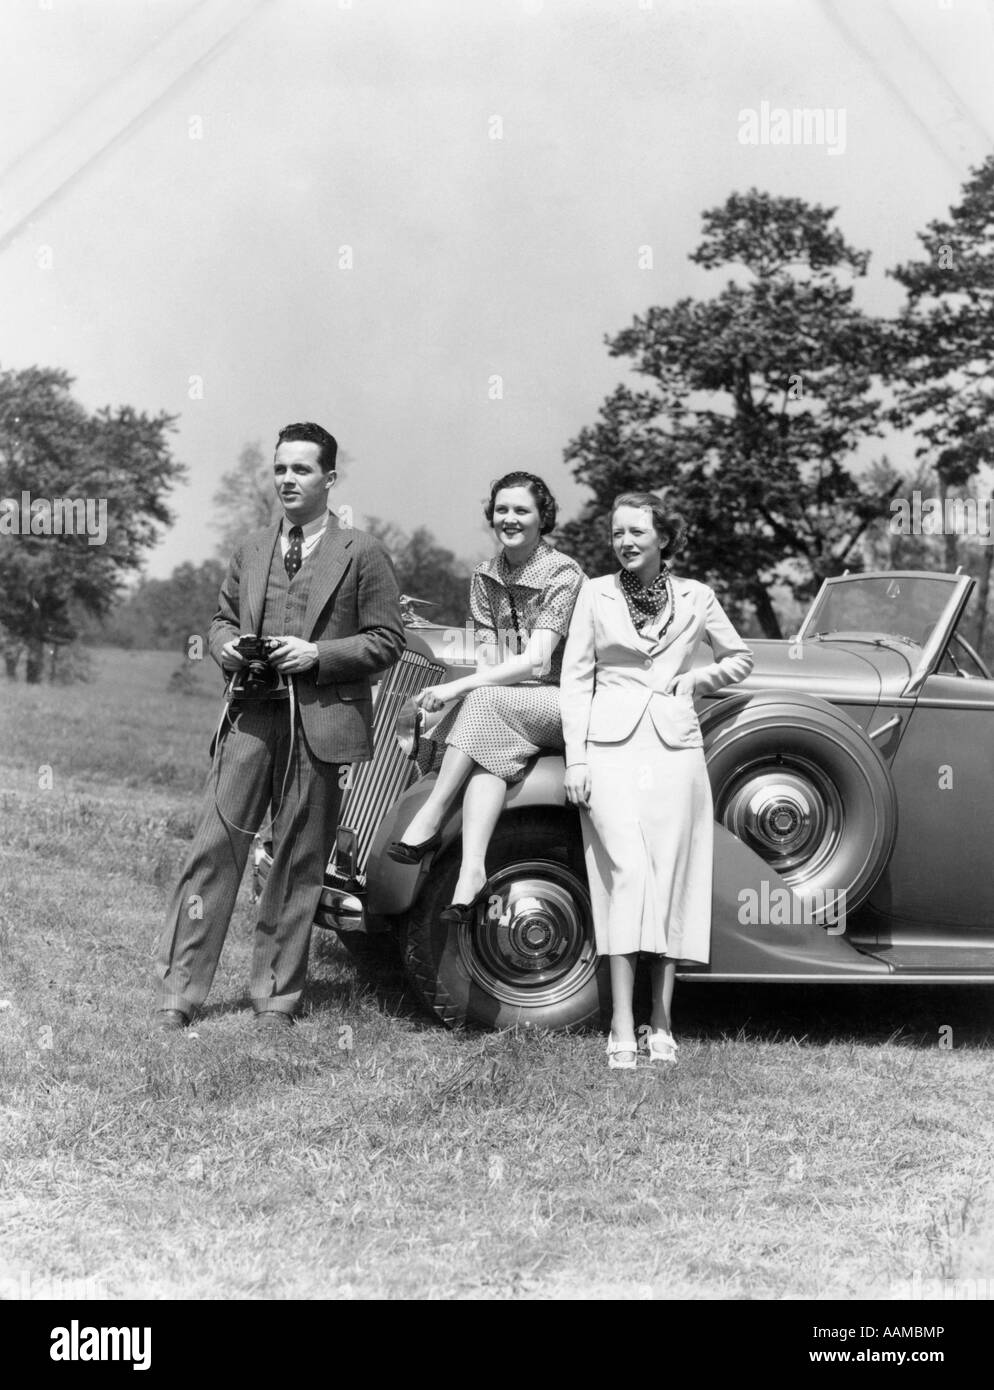 1930s MAN WITH CAMERA AND TWO WOMEN IN FRONT OF CONVERTIBLE CAR STYLE FASHION WEALTH SPECTATORS Stock Photo